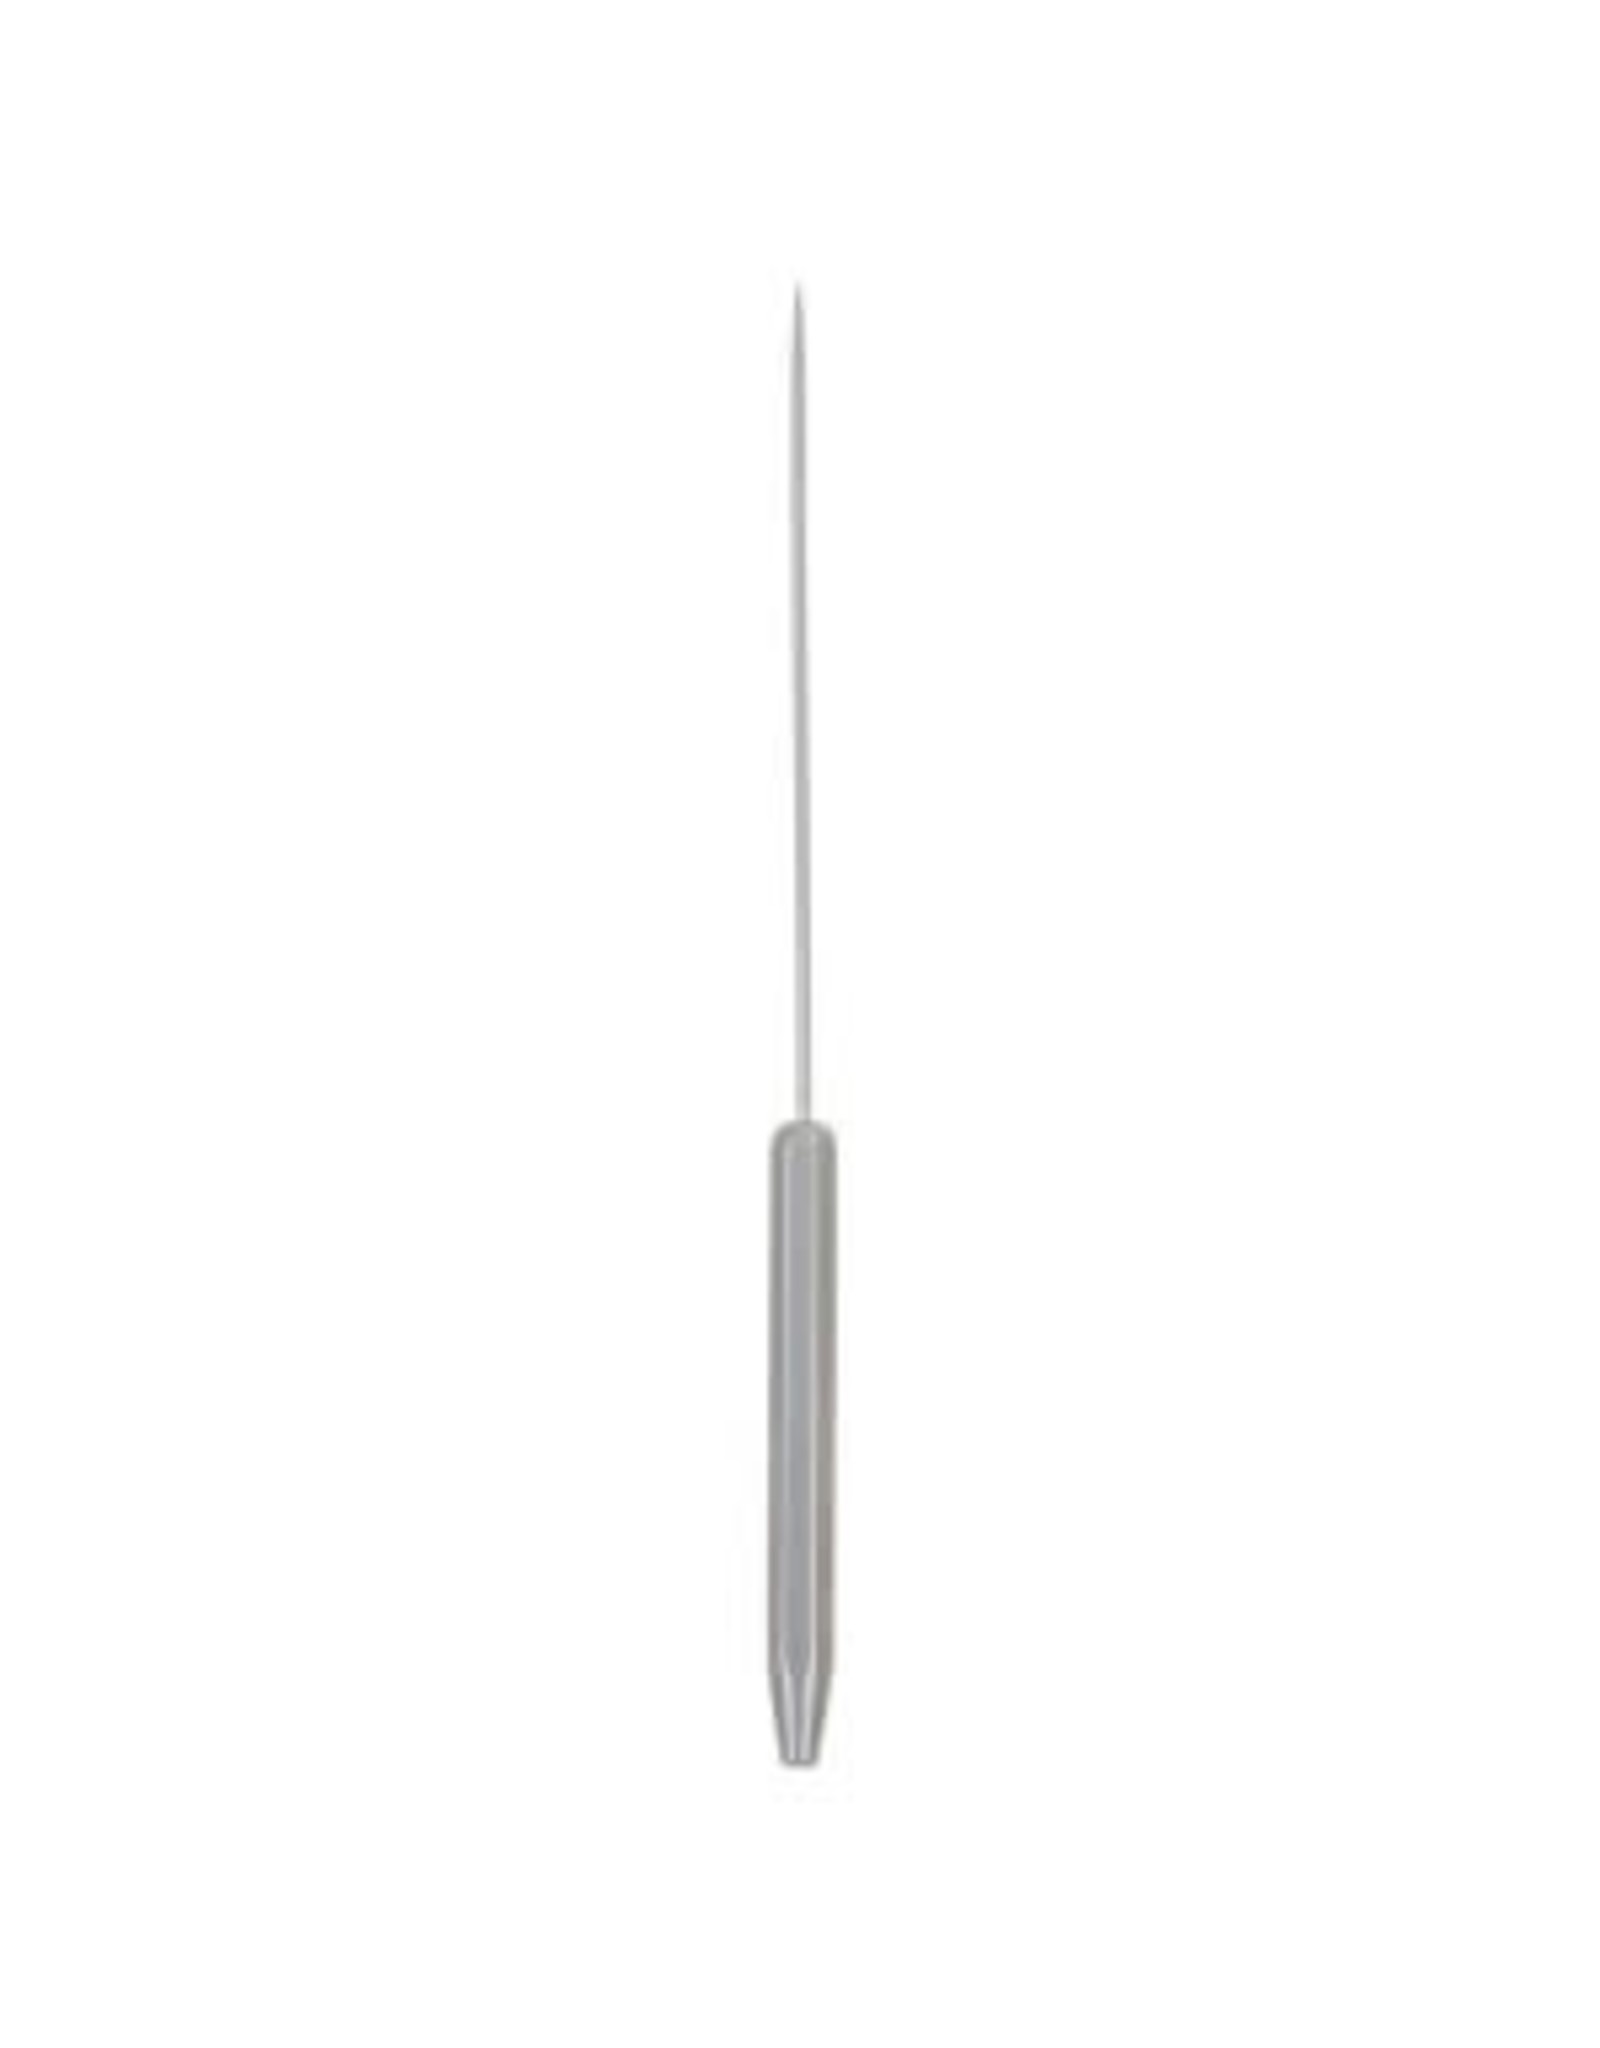 Dr. Slick Dr. Slick Bodkin, Satin, w/ Half Hitch Tool, Stainless Steel